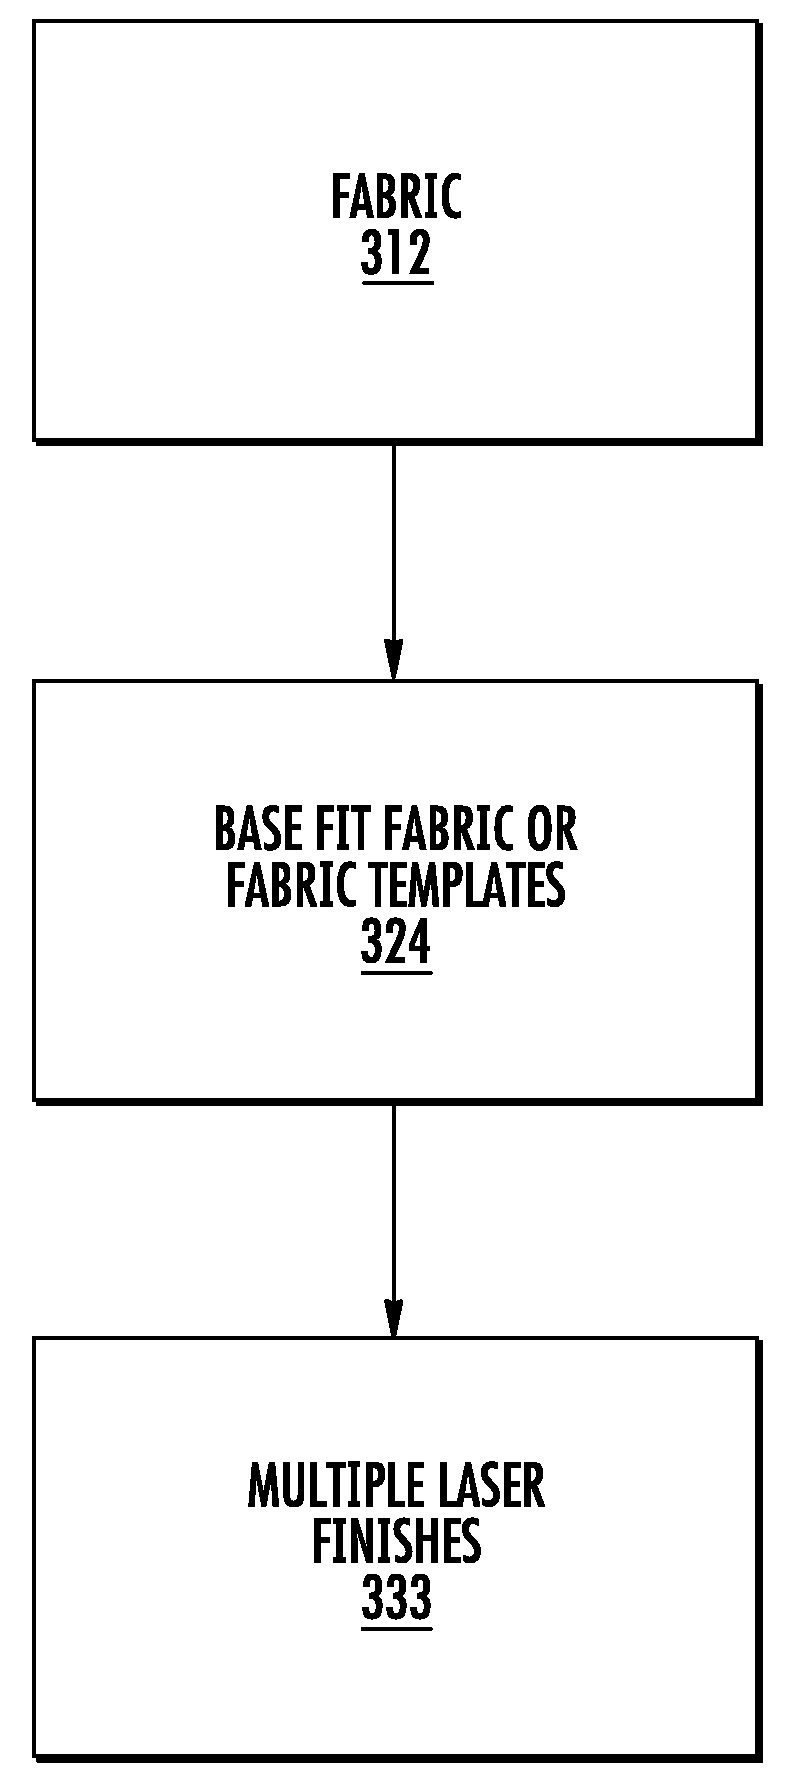 Using Fabric Templates to Obtain Multiple Finishes by Laser Finishing